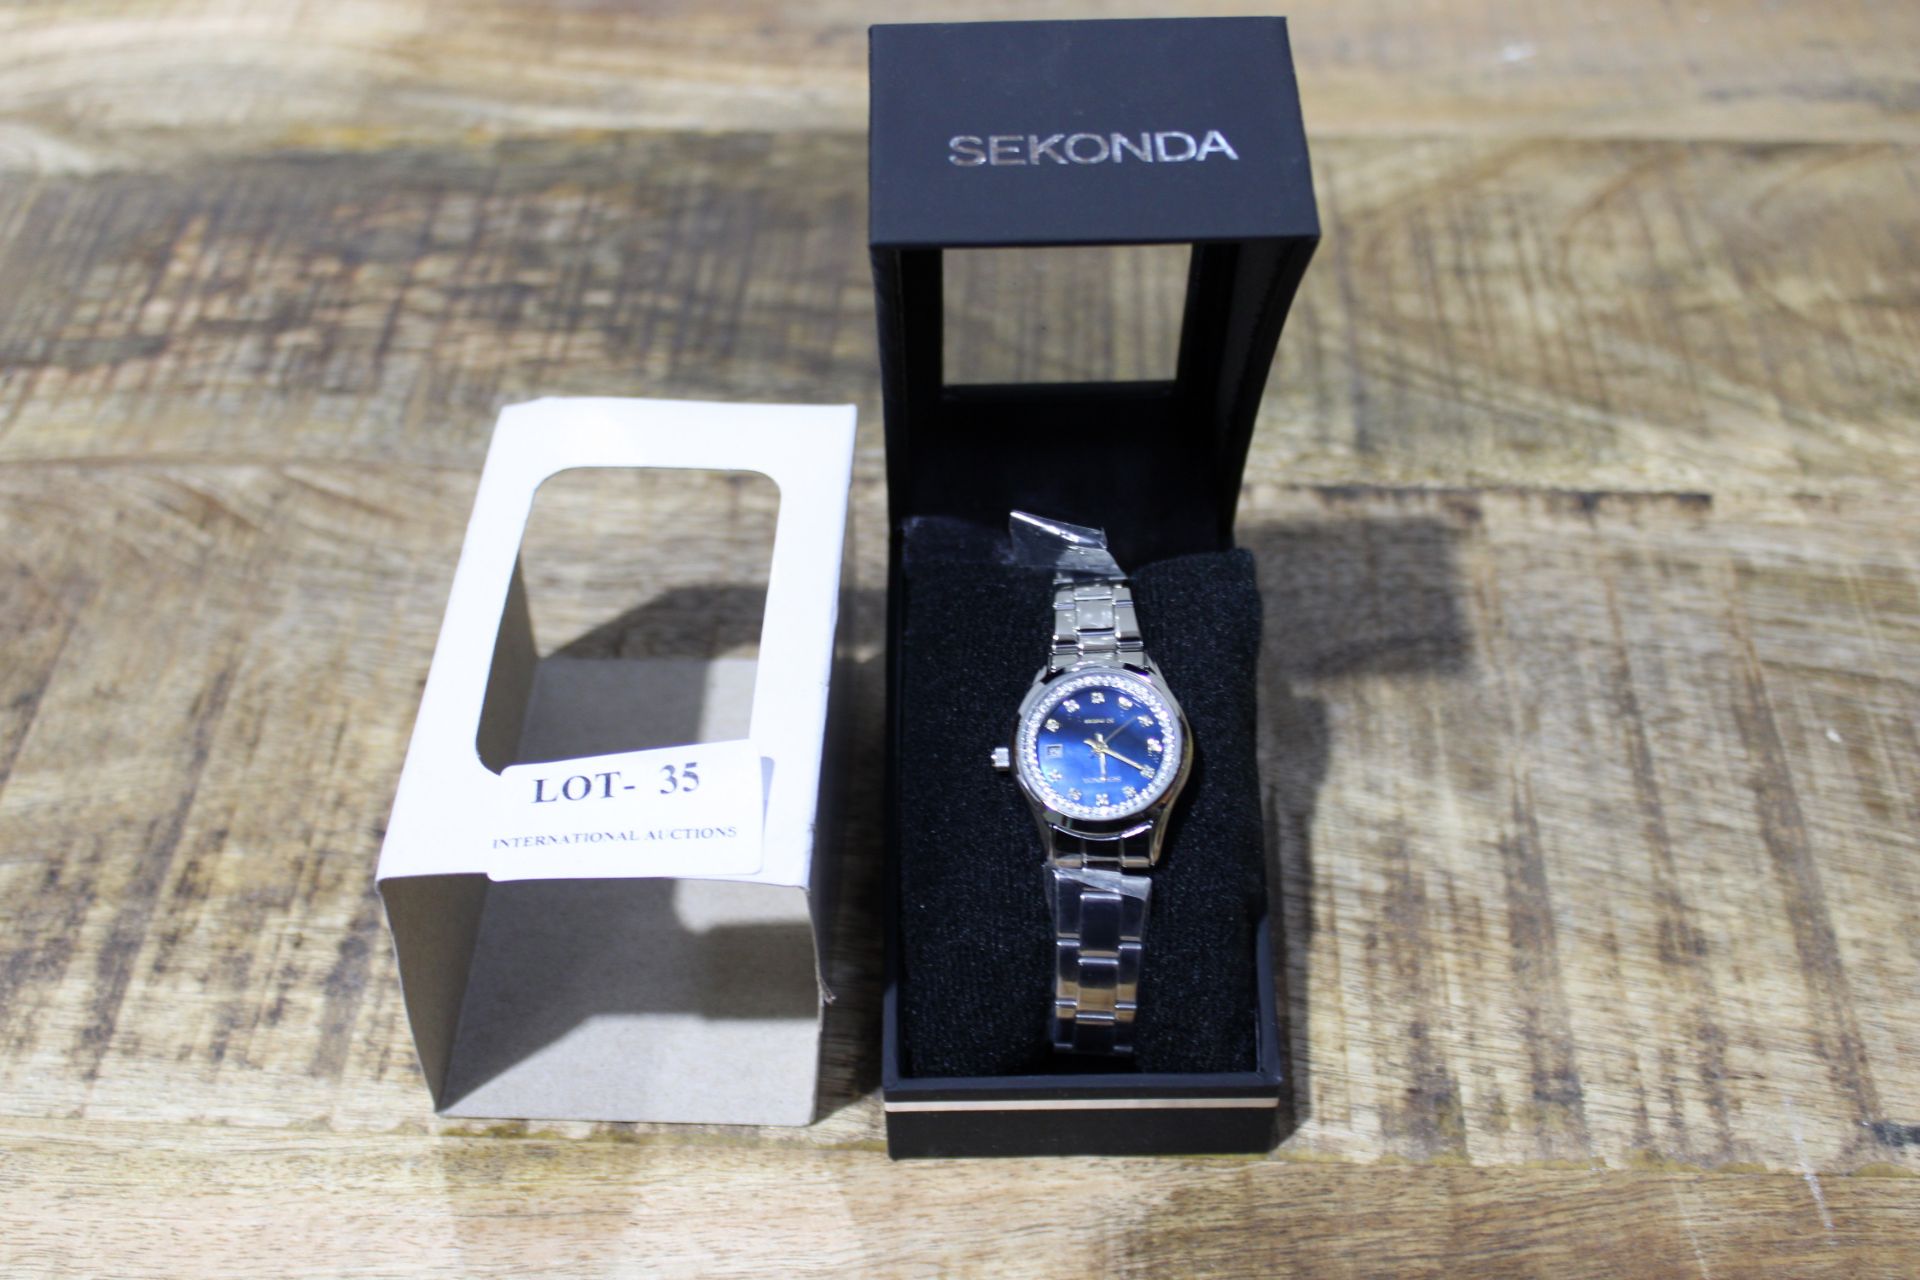 BRAND NEW SEKONDA WOMANS WATCH WITH BLUE FACE RRP £35 Condition ReportBRAND NEW